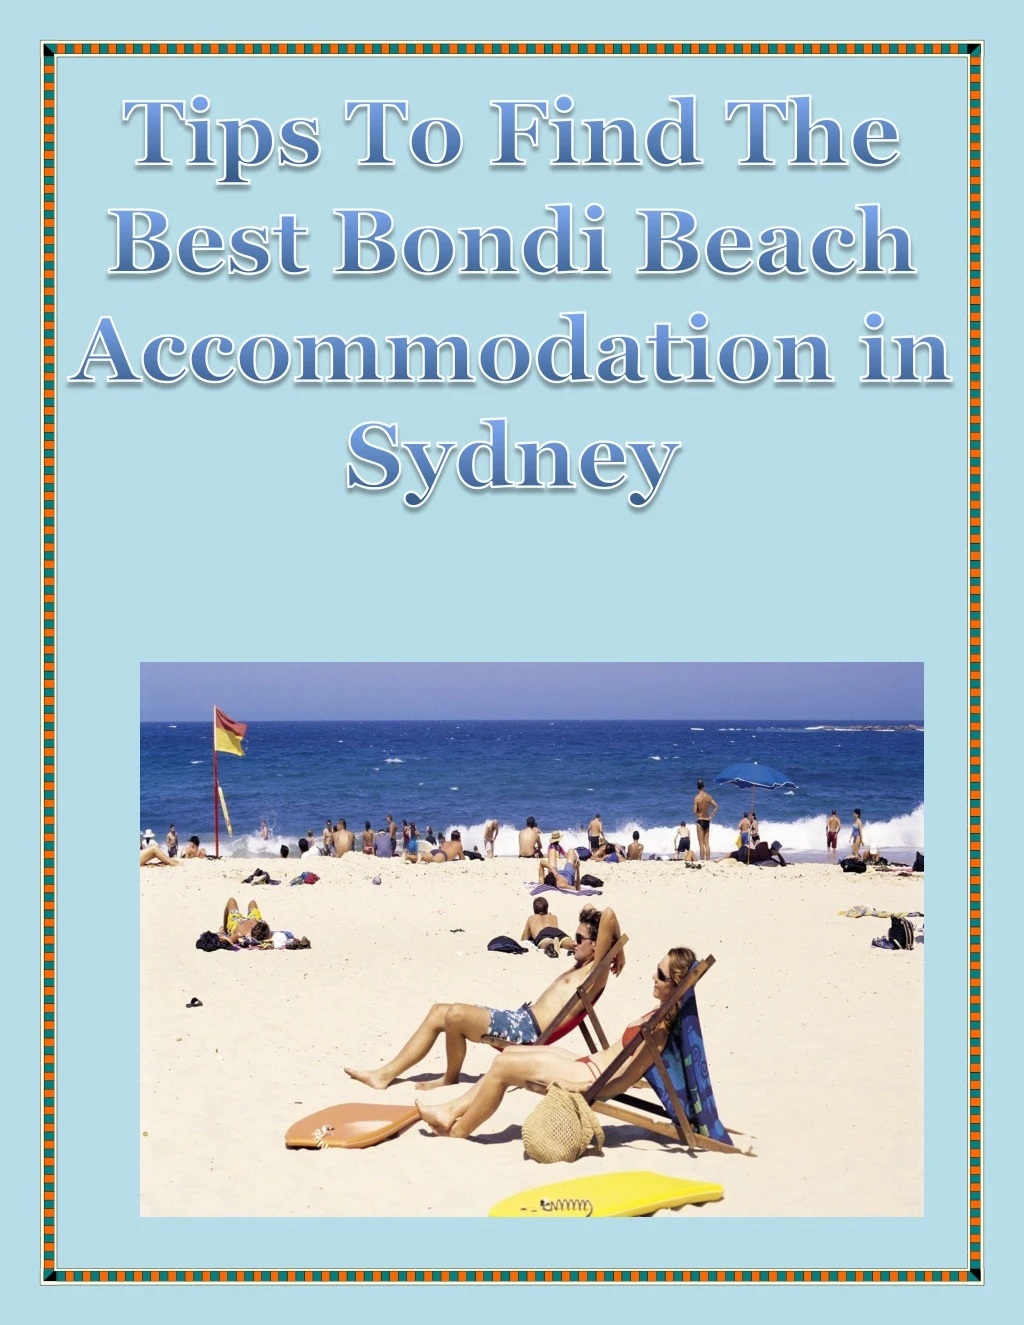 tips to find the best bondi beach accommodation